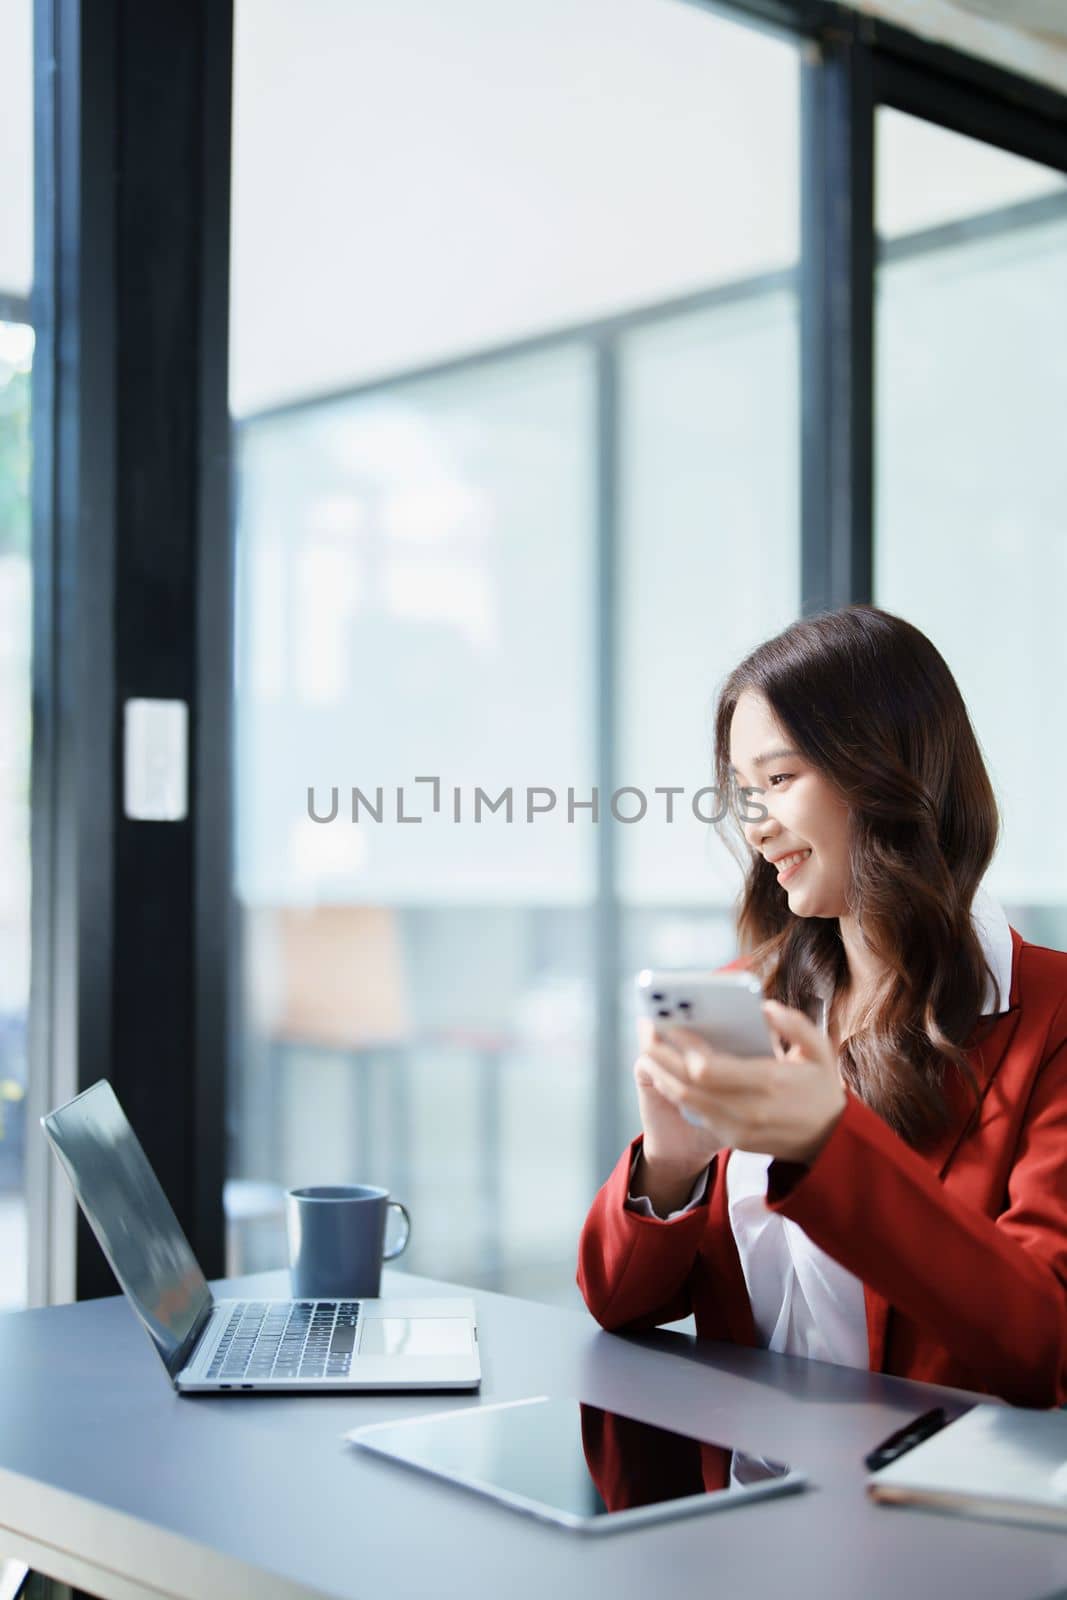 Portrait of a young Asian woman showing a smiling face as she uses her phone, computer and financial documents on her desk in the early morning hours.